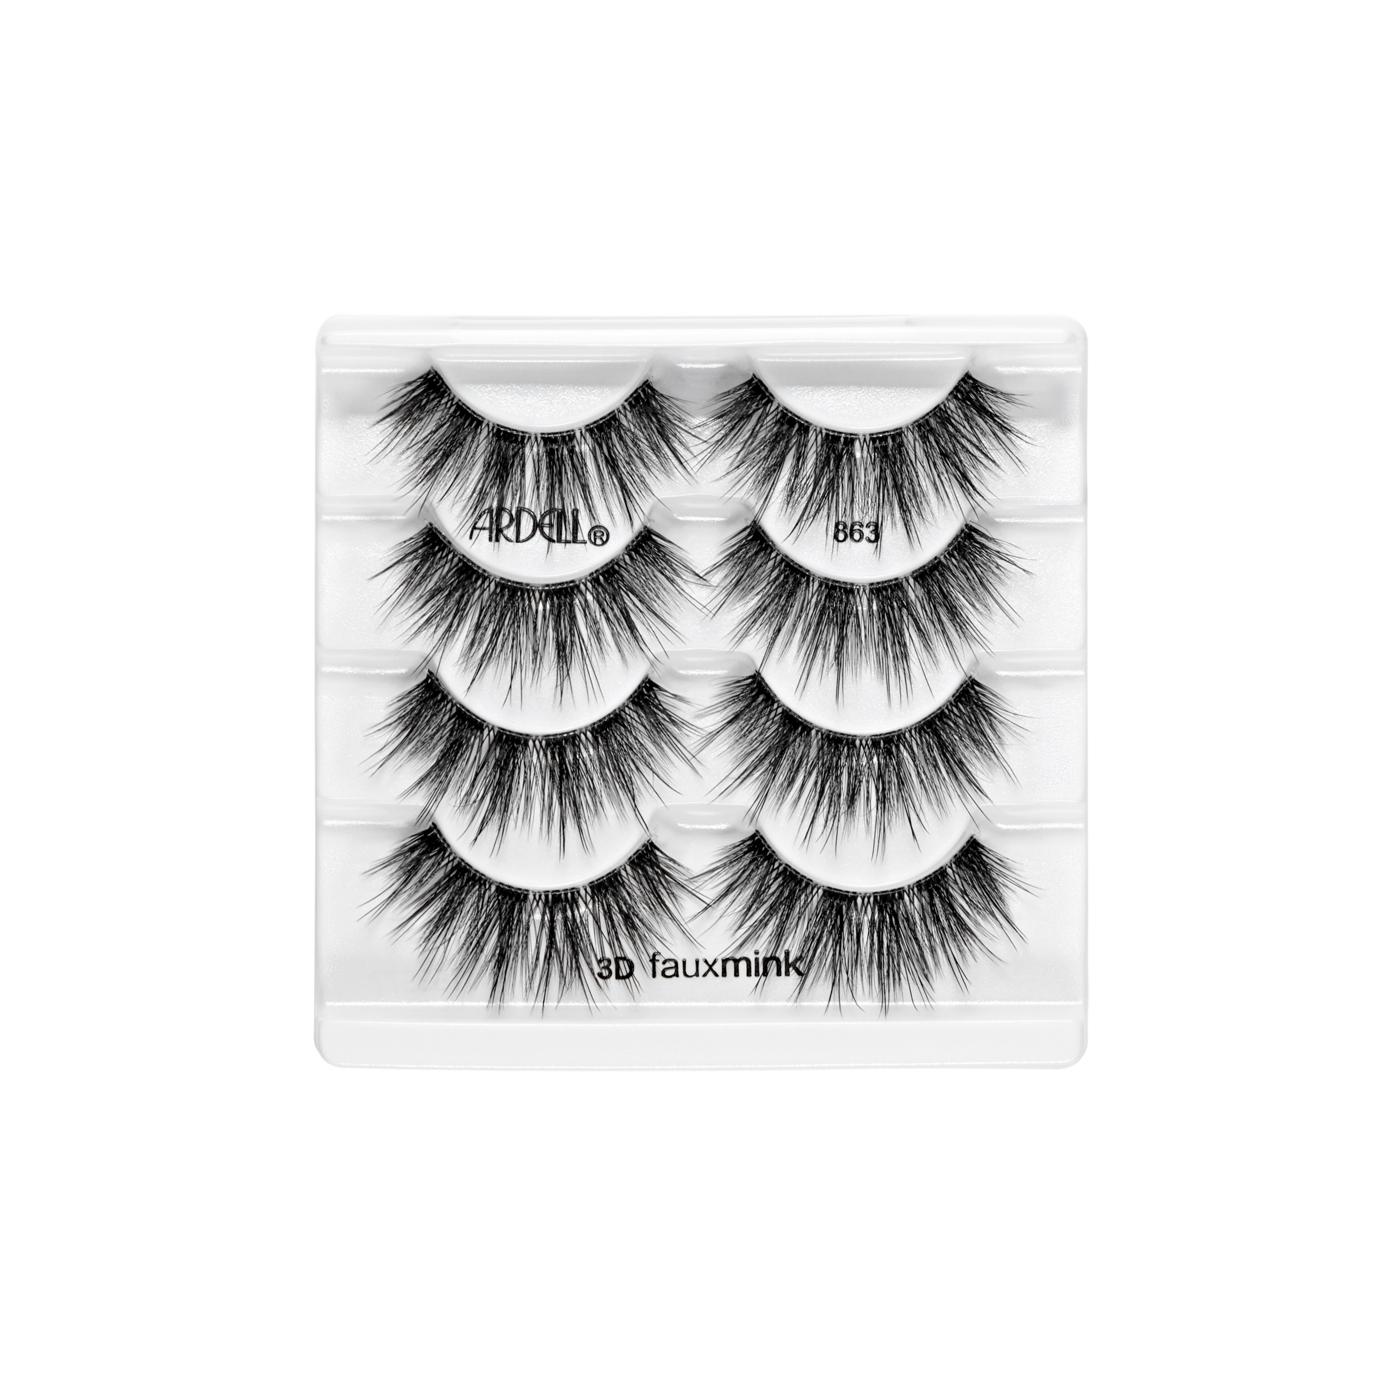 Ardell 3D Faux Mink Lashes - 863; image 3 of 3